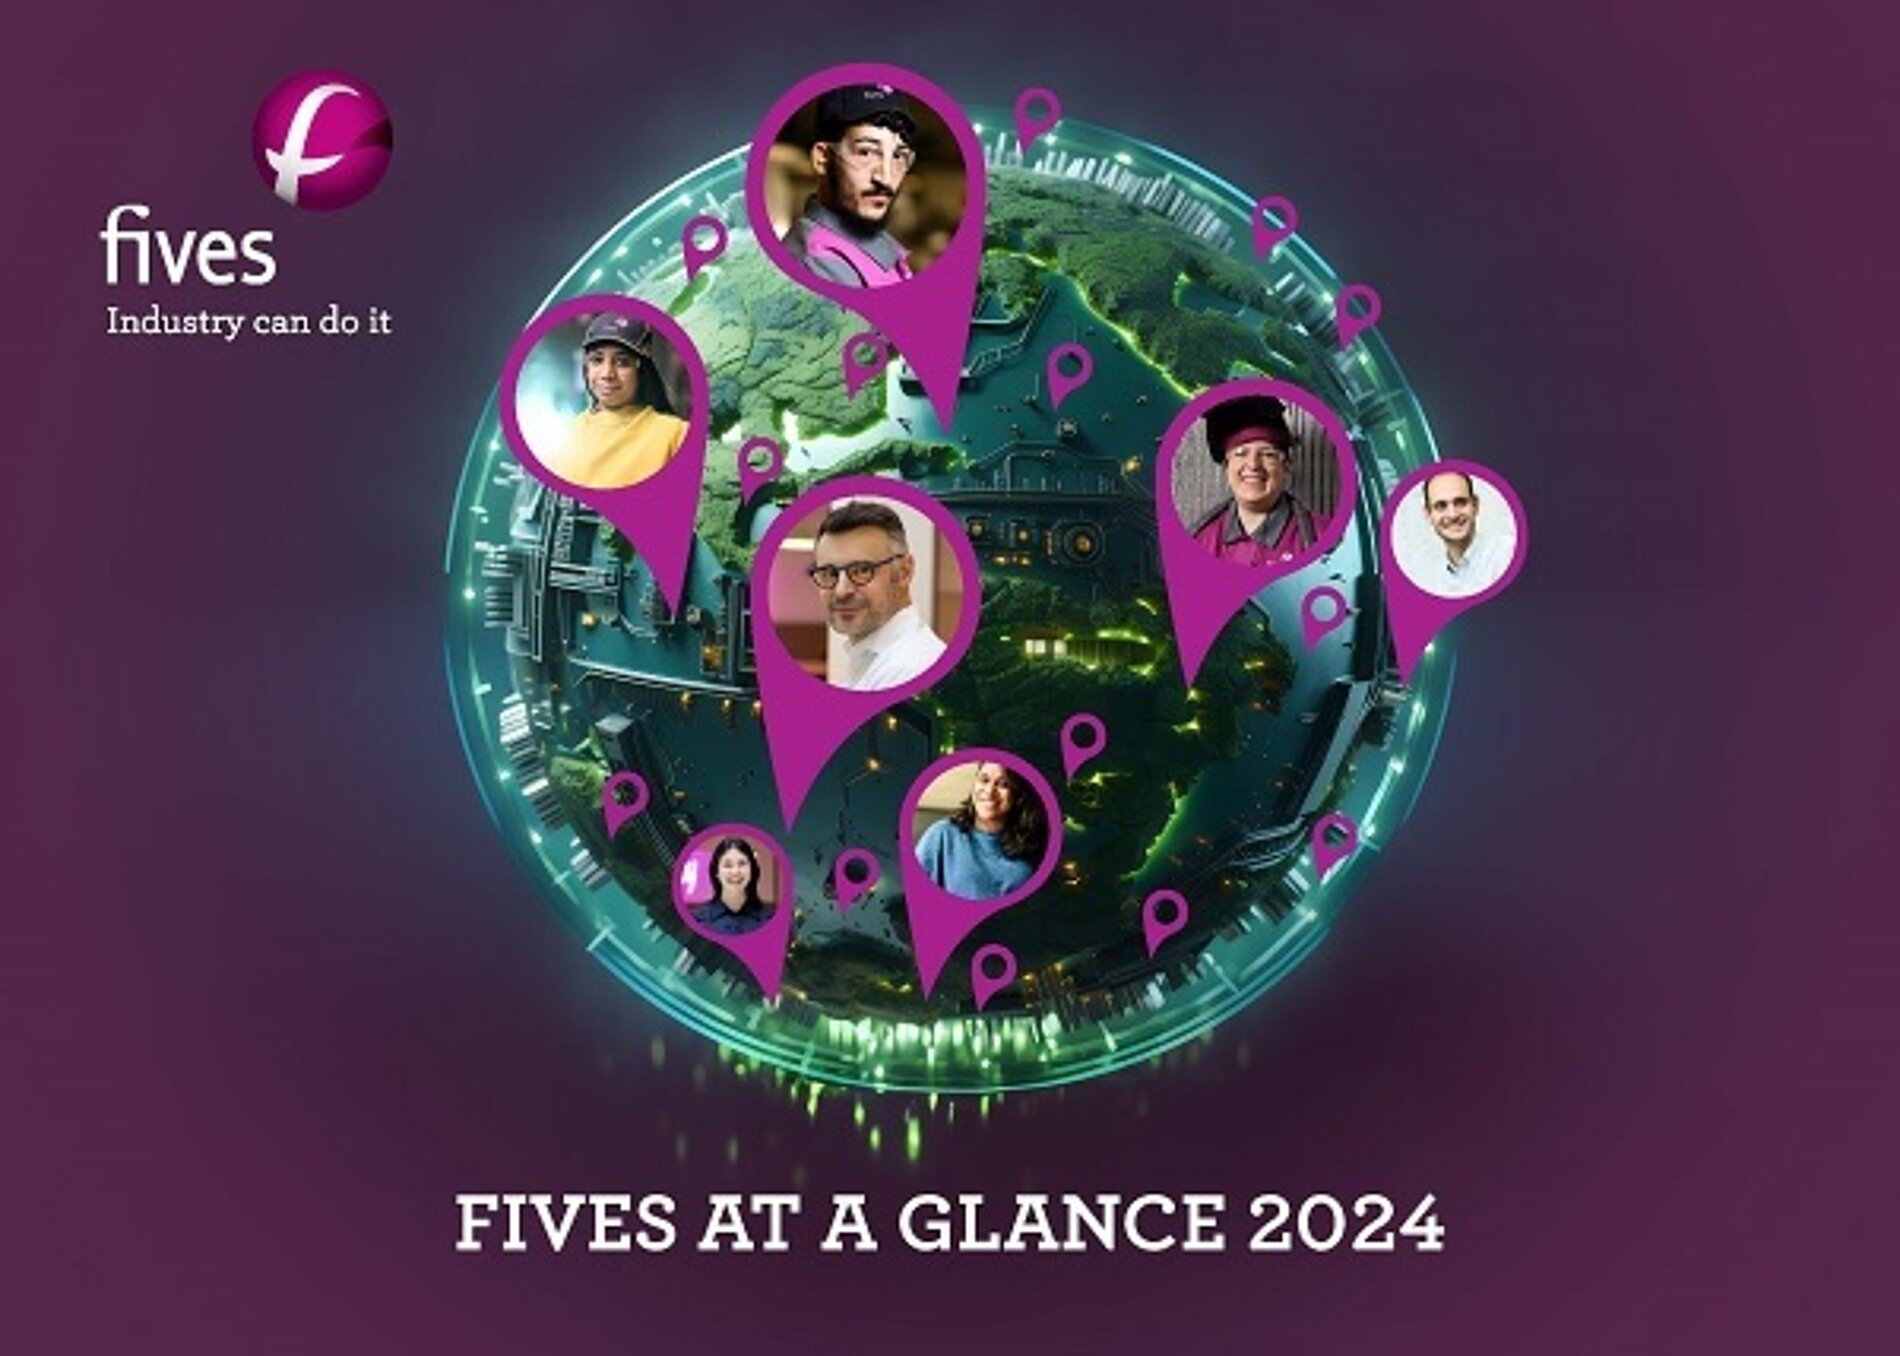 Fives at a glance 2024